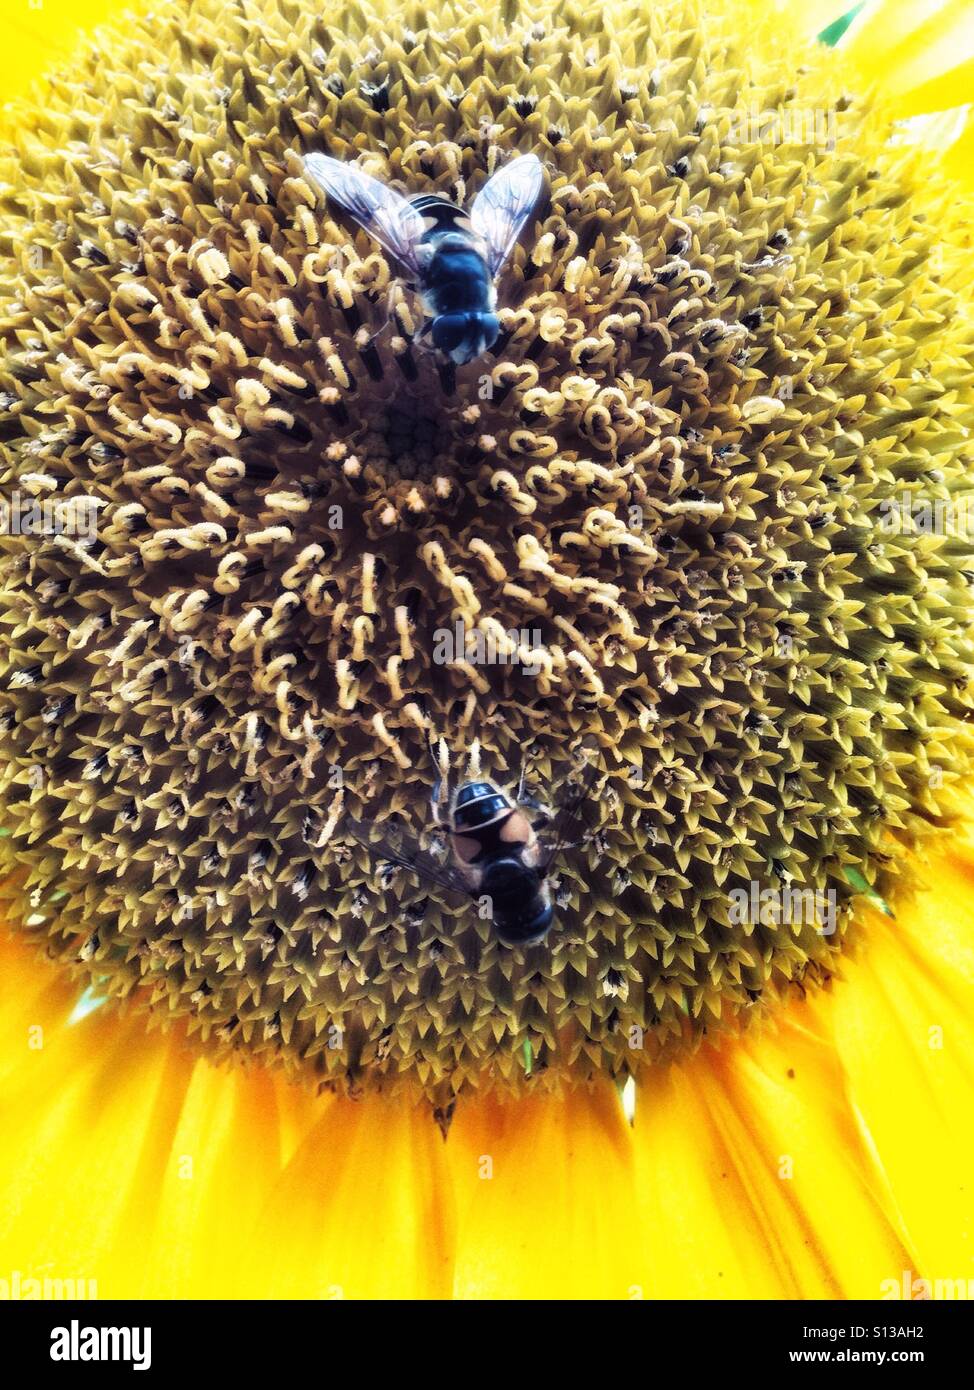 Two hoverflies sitting on a sunflower Stock Photo